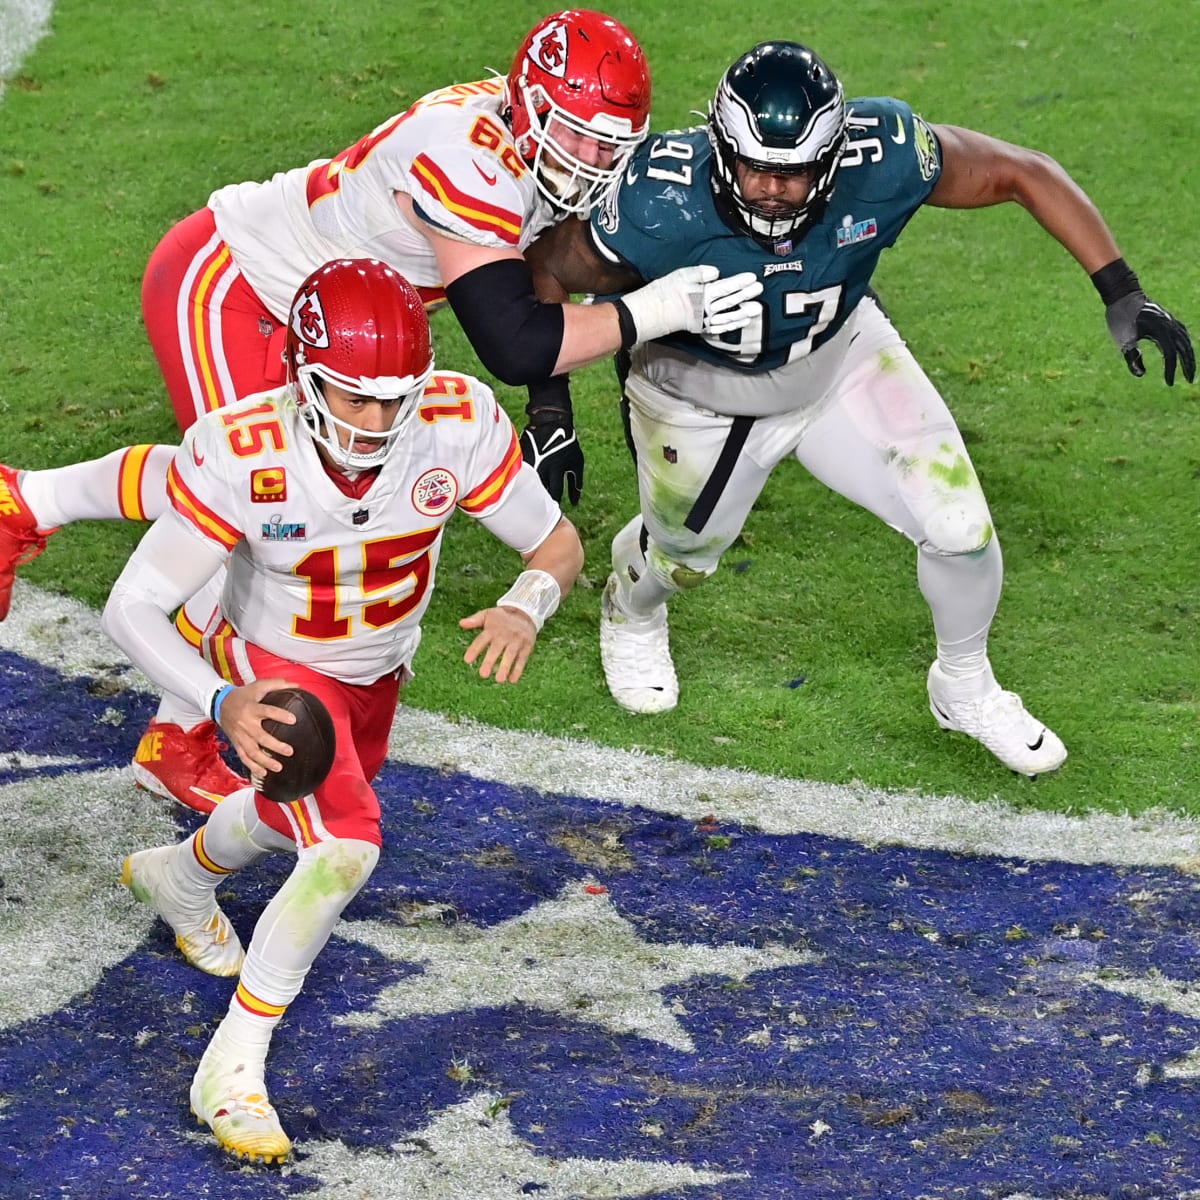 Super Bowl 2023: Holding Call Marred Final Minutes of Thrilling Game